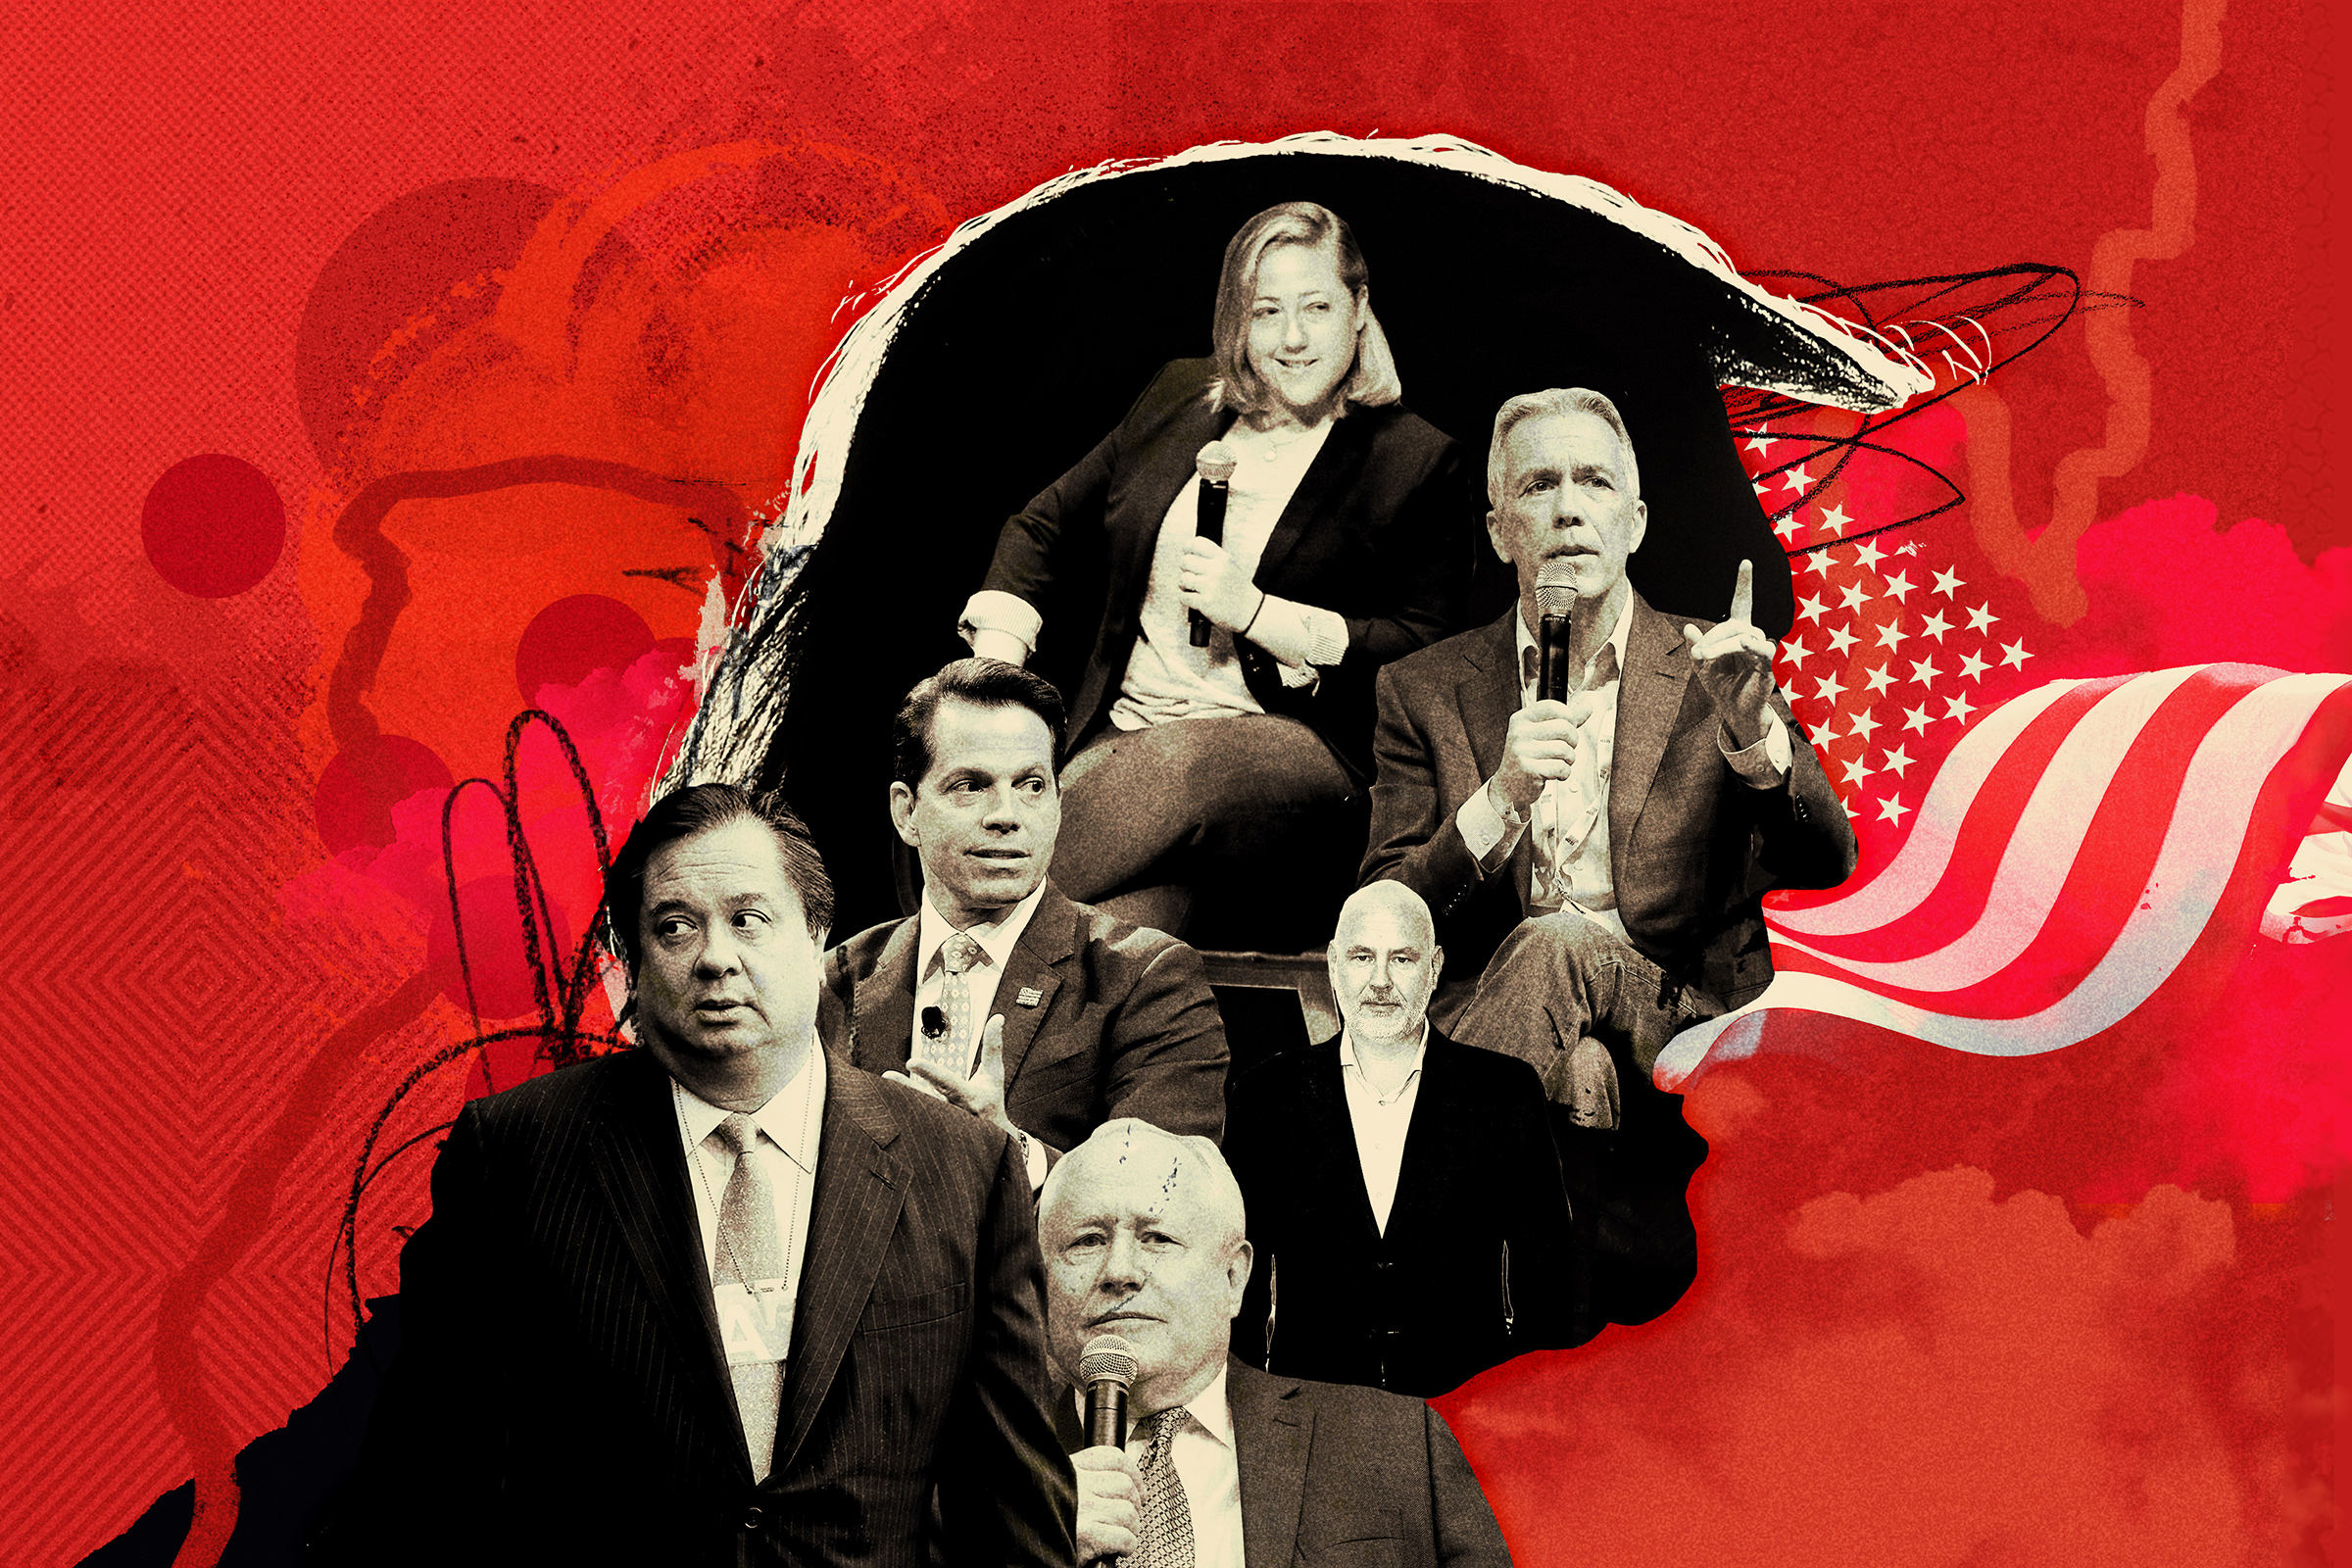 Clockwise from top: Trump critics Sarah Longwell, Joe Walsh, Steve Schmidt, Bill Kristol, George Conway and Anthony Scaramucci are working to defeat the President in November (Illustration by Eleanor Shakespeare for TIME)